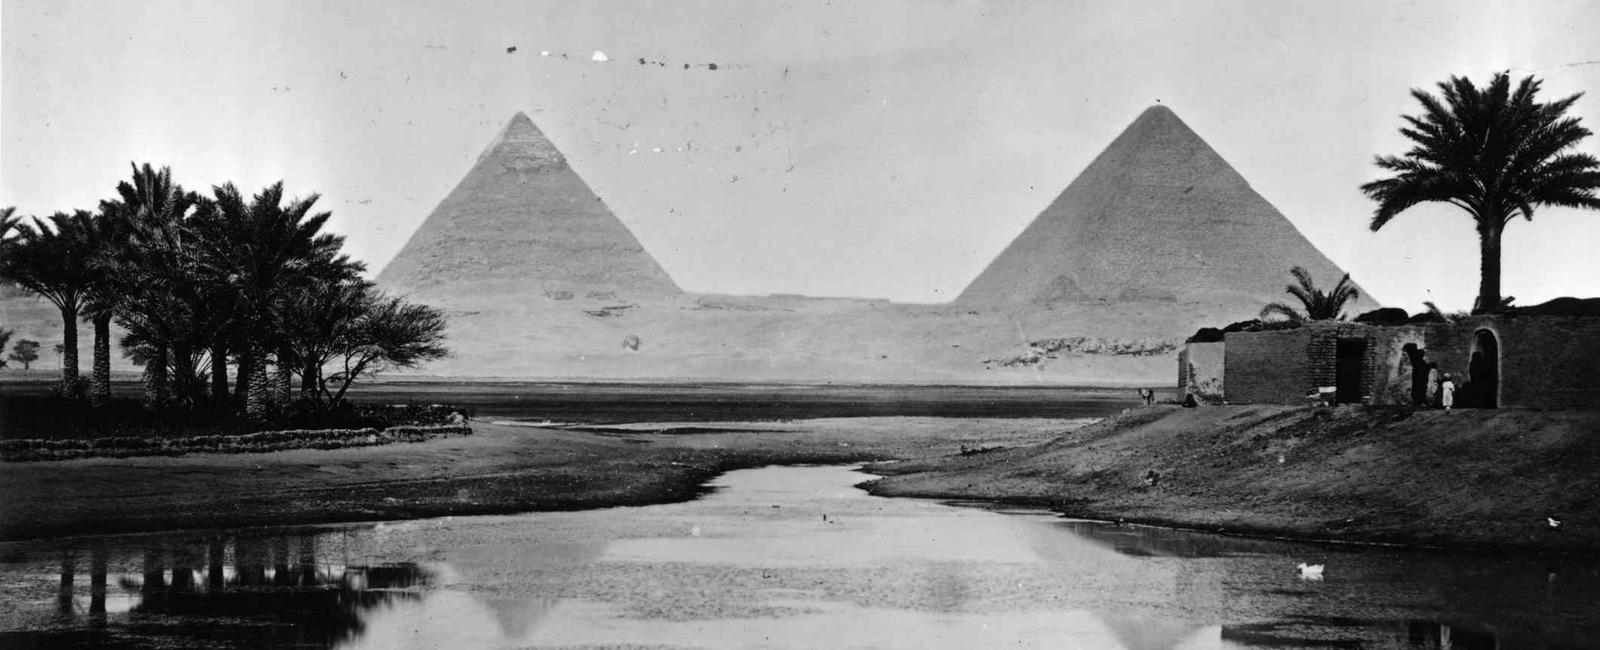 Mostly all egyptian pyramids are located on the west bank of nile